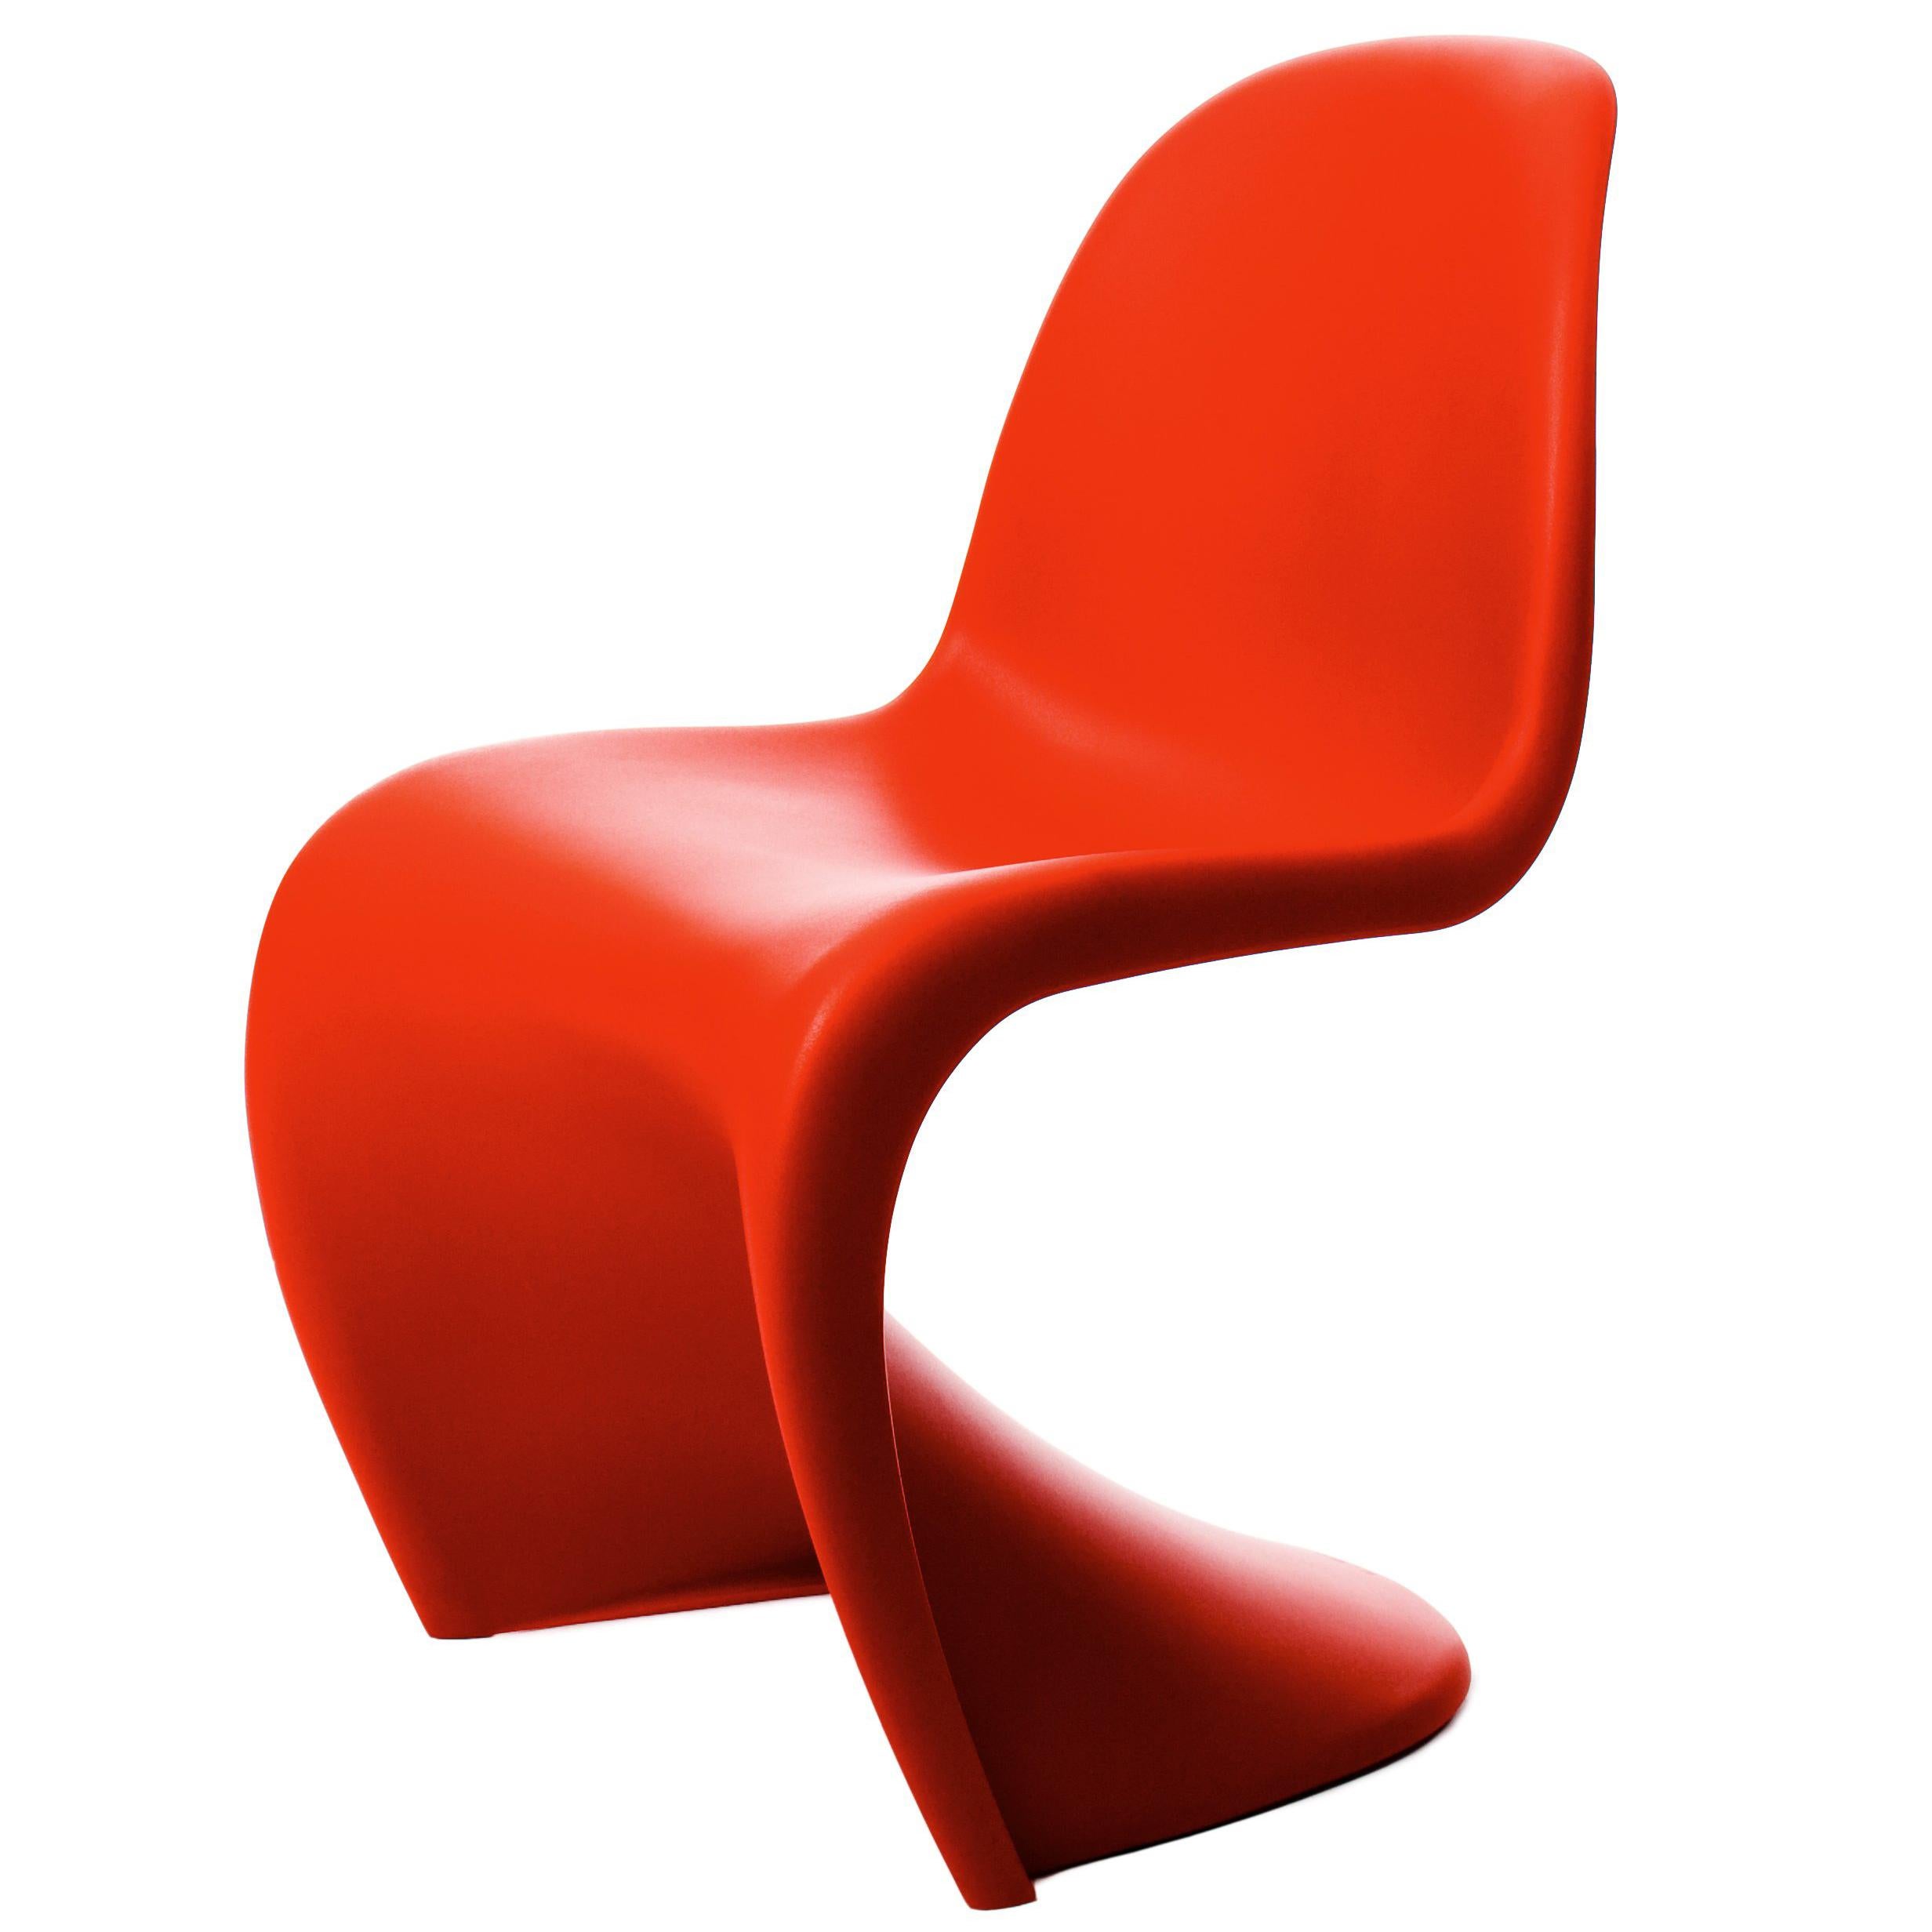 Vitra Panton Chair in Classic Red by Verner Panton For Sale